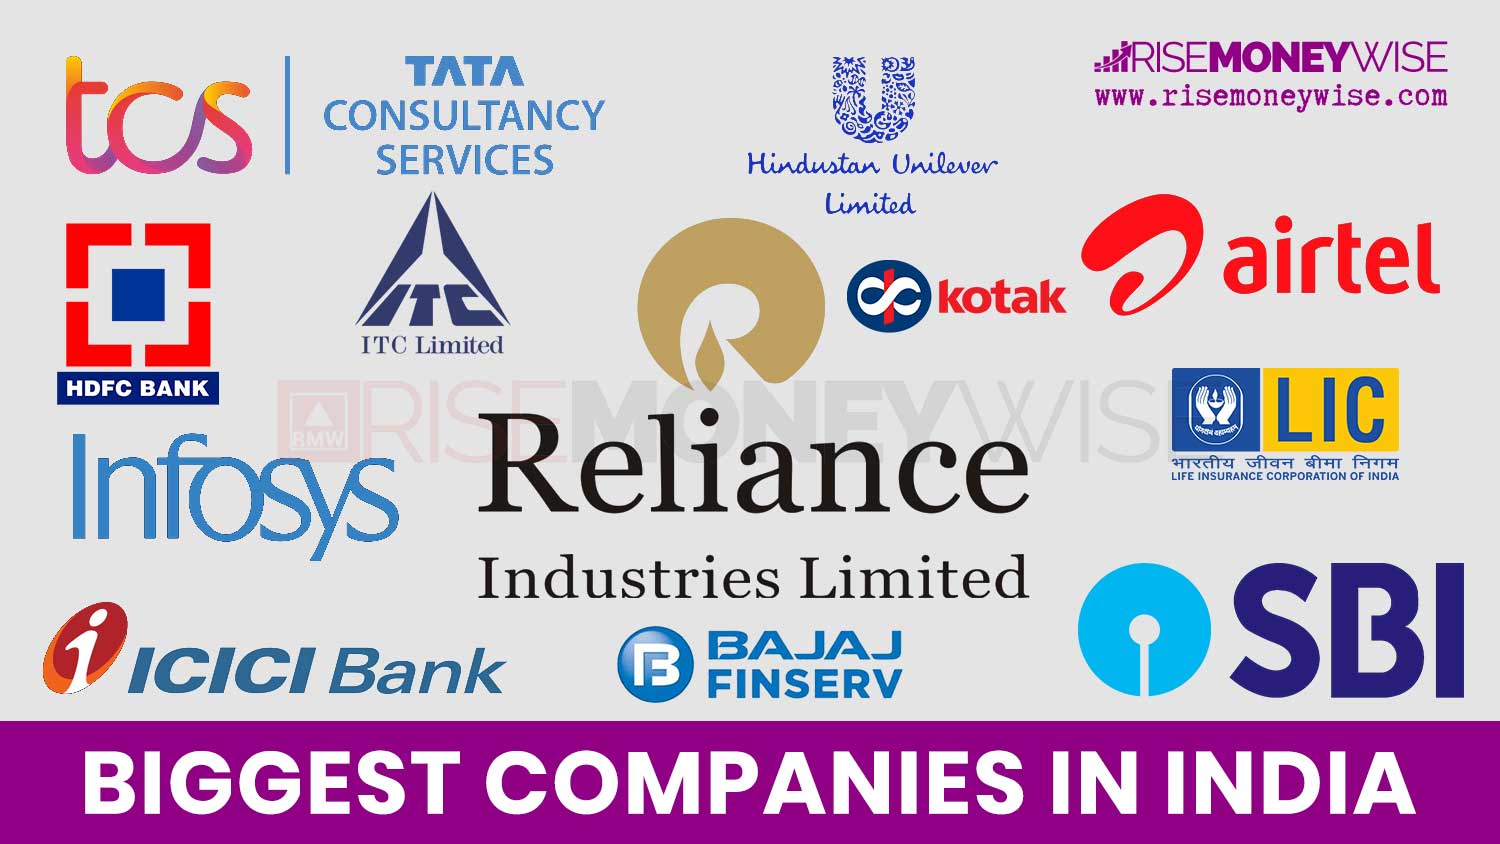 Biggest and Most Valuable Companies in India